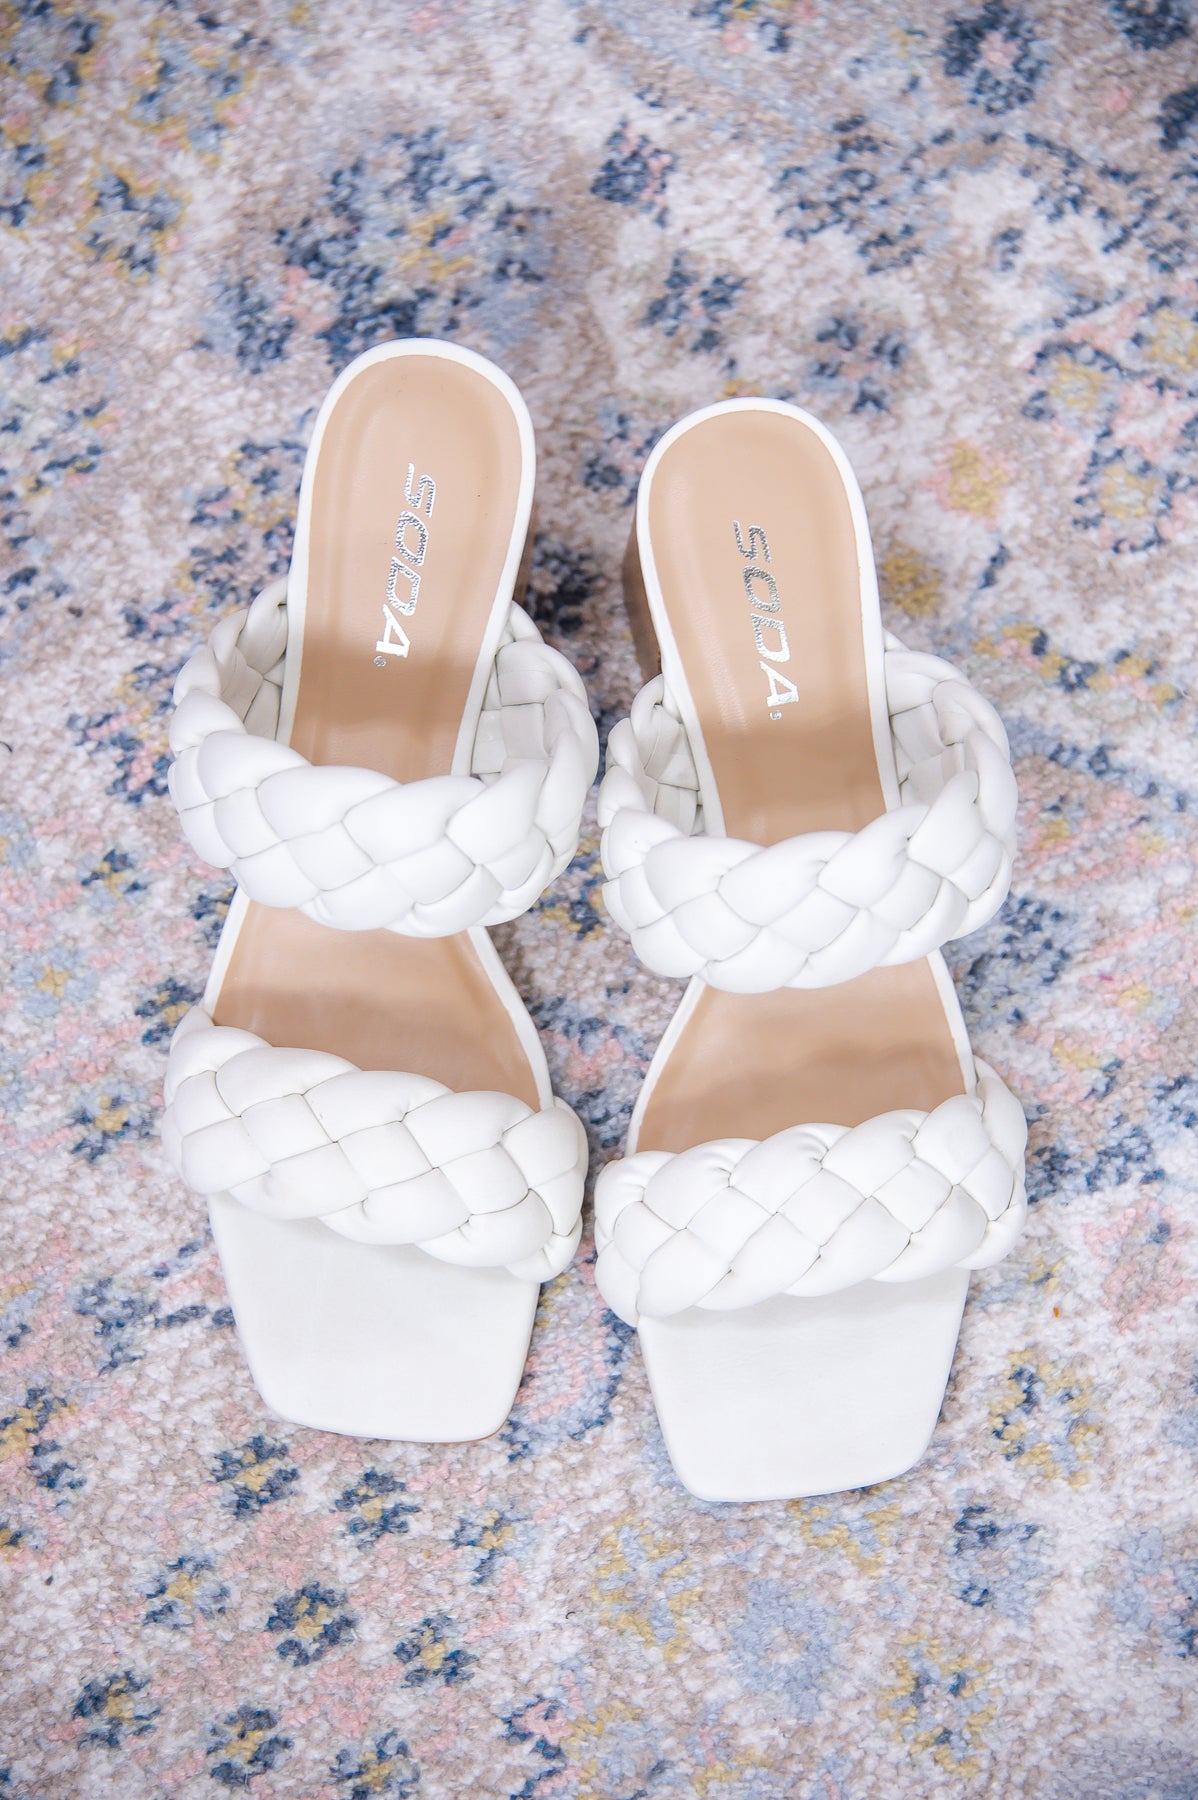 She's Moving On Off White Braided Heels - SHO2564OW